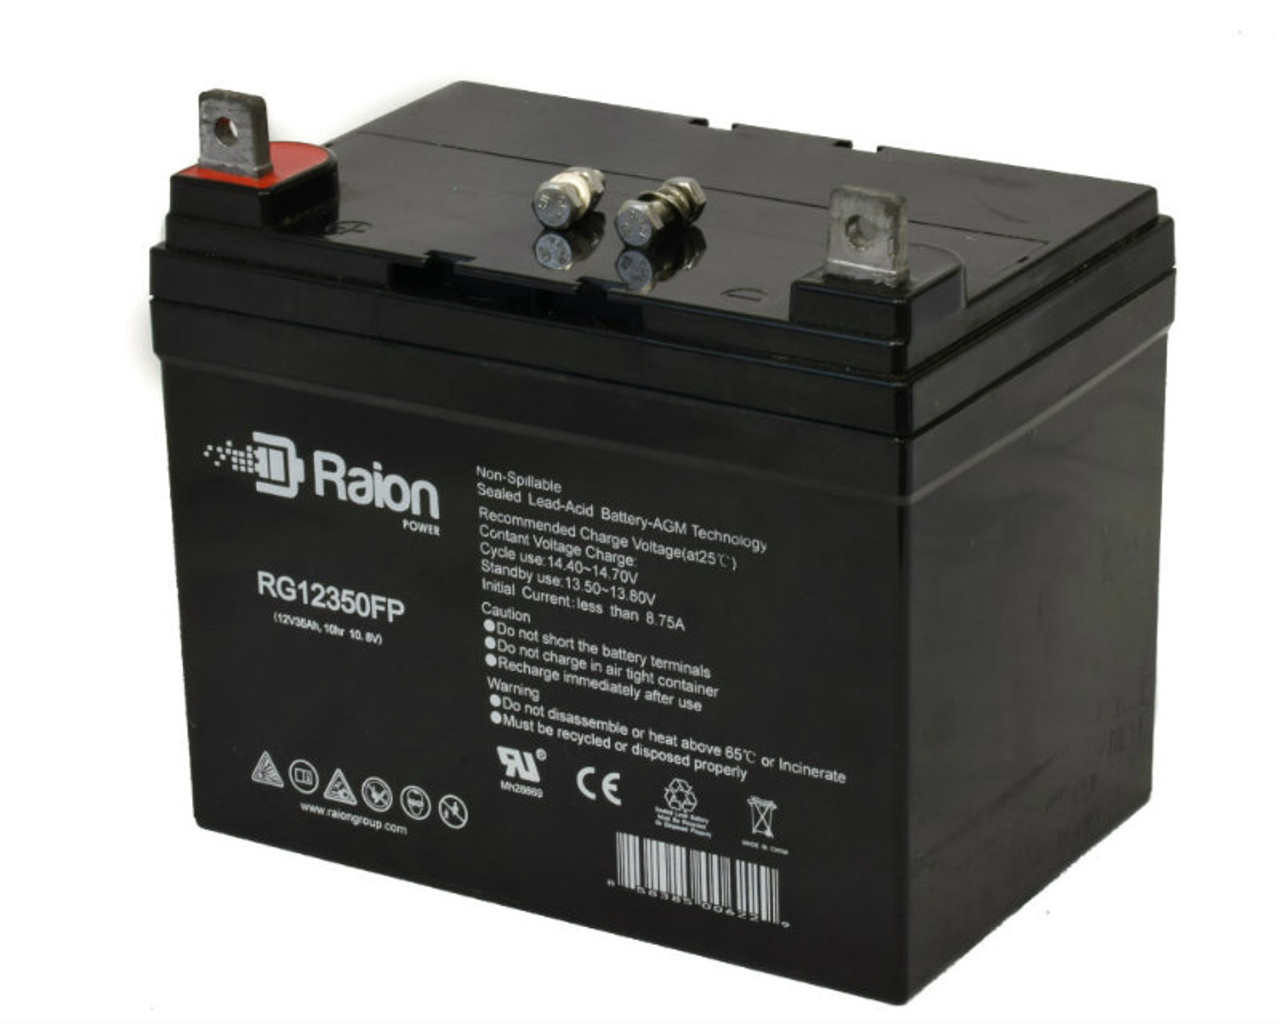 Raion Power Replacement 12V 35Ah Battery for Yazoo/Kees ZKW 61252 - 1 Pack